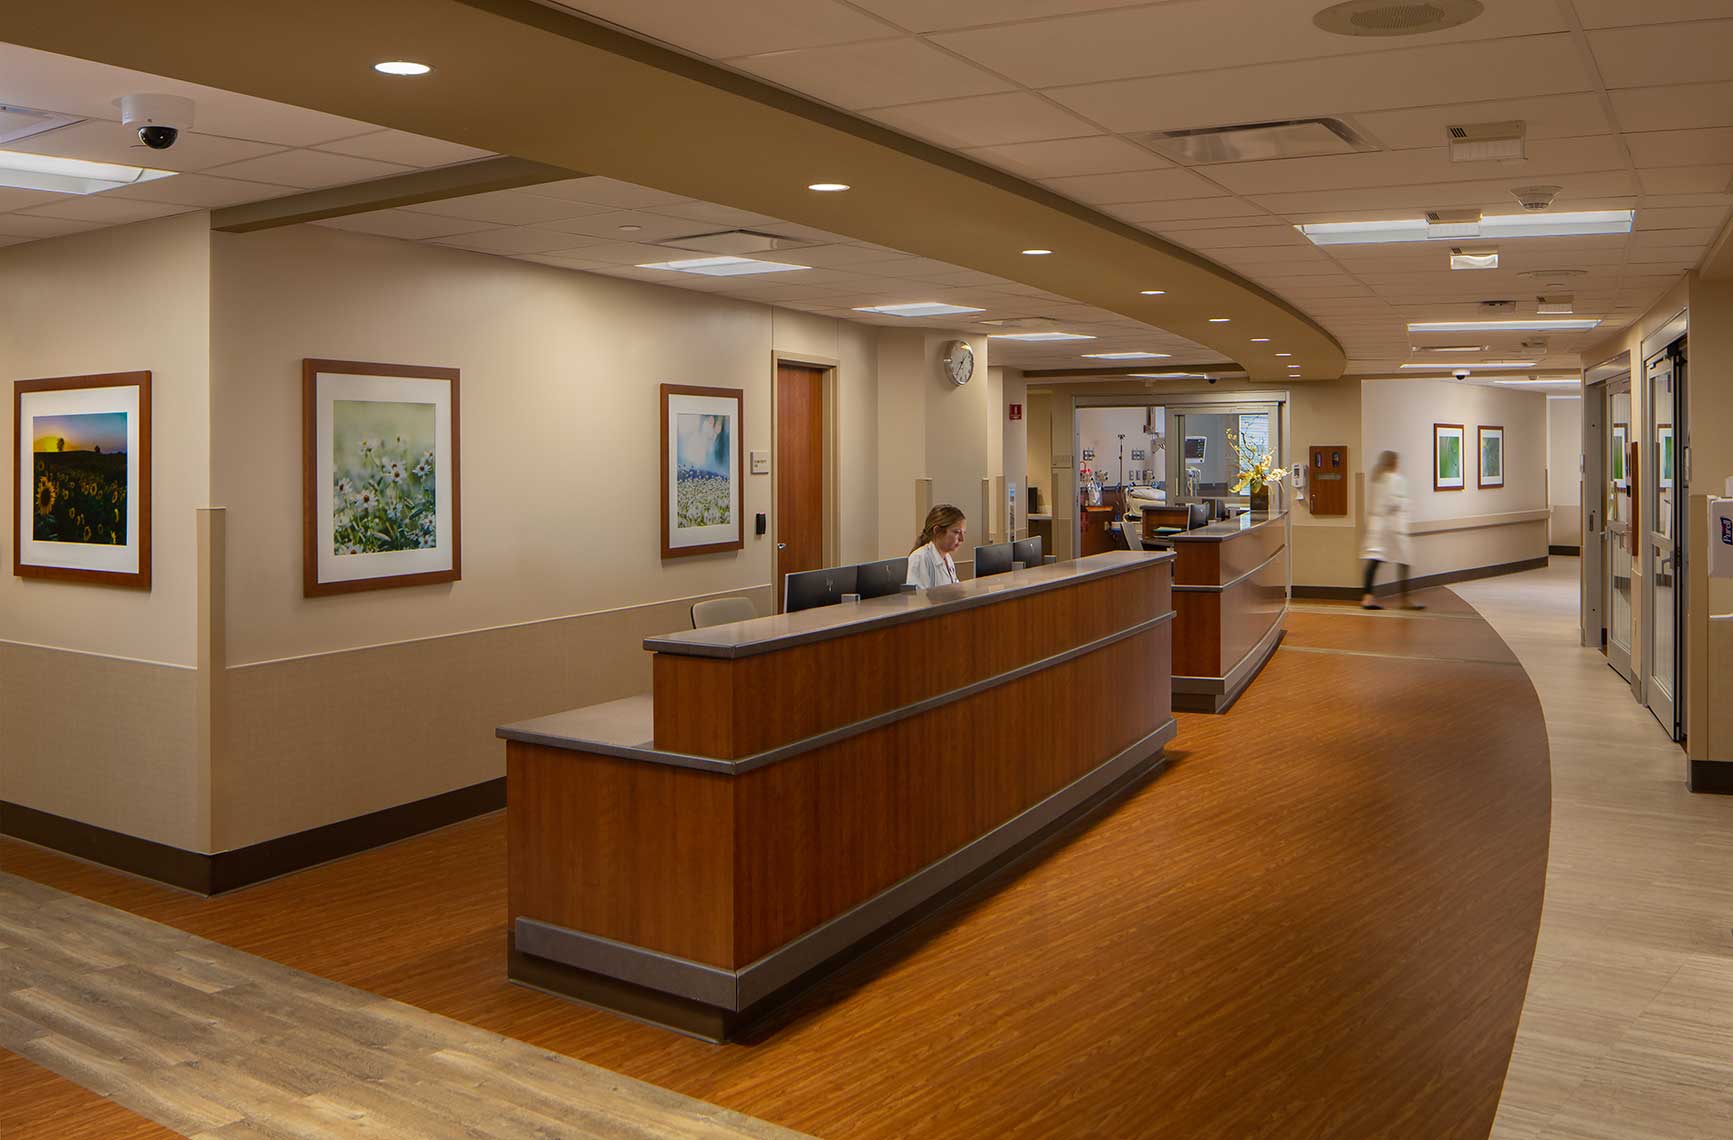 An image of an expansive Nurse Station at Centerpoint Medical Center in Independence, Missouri